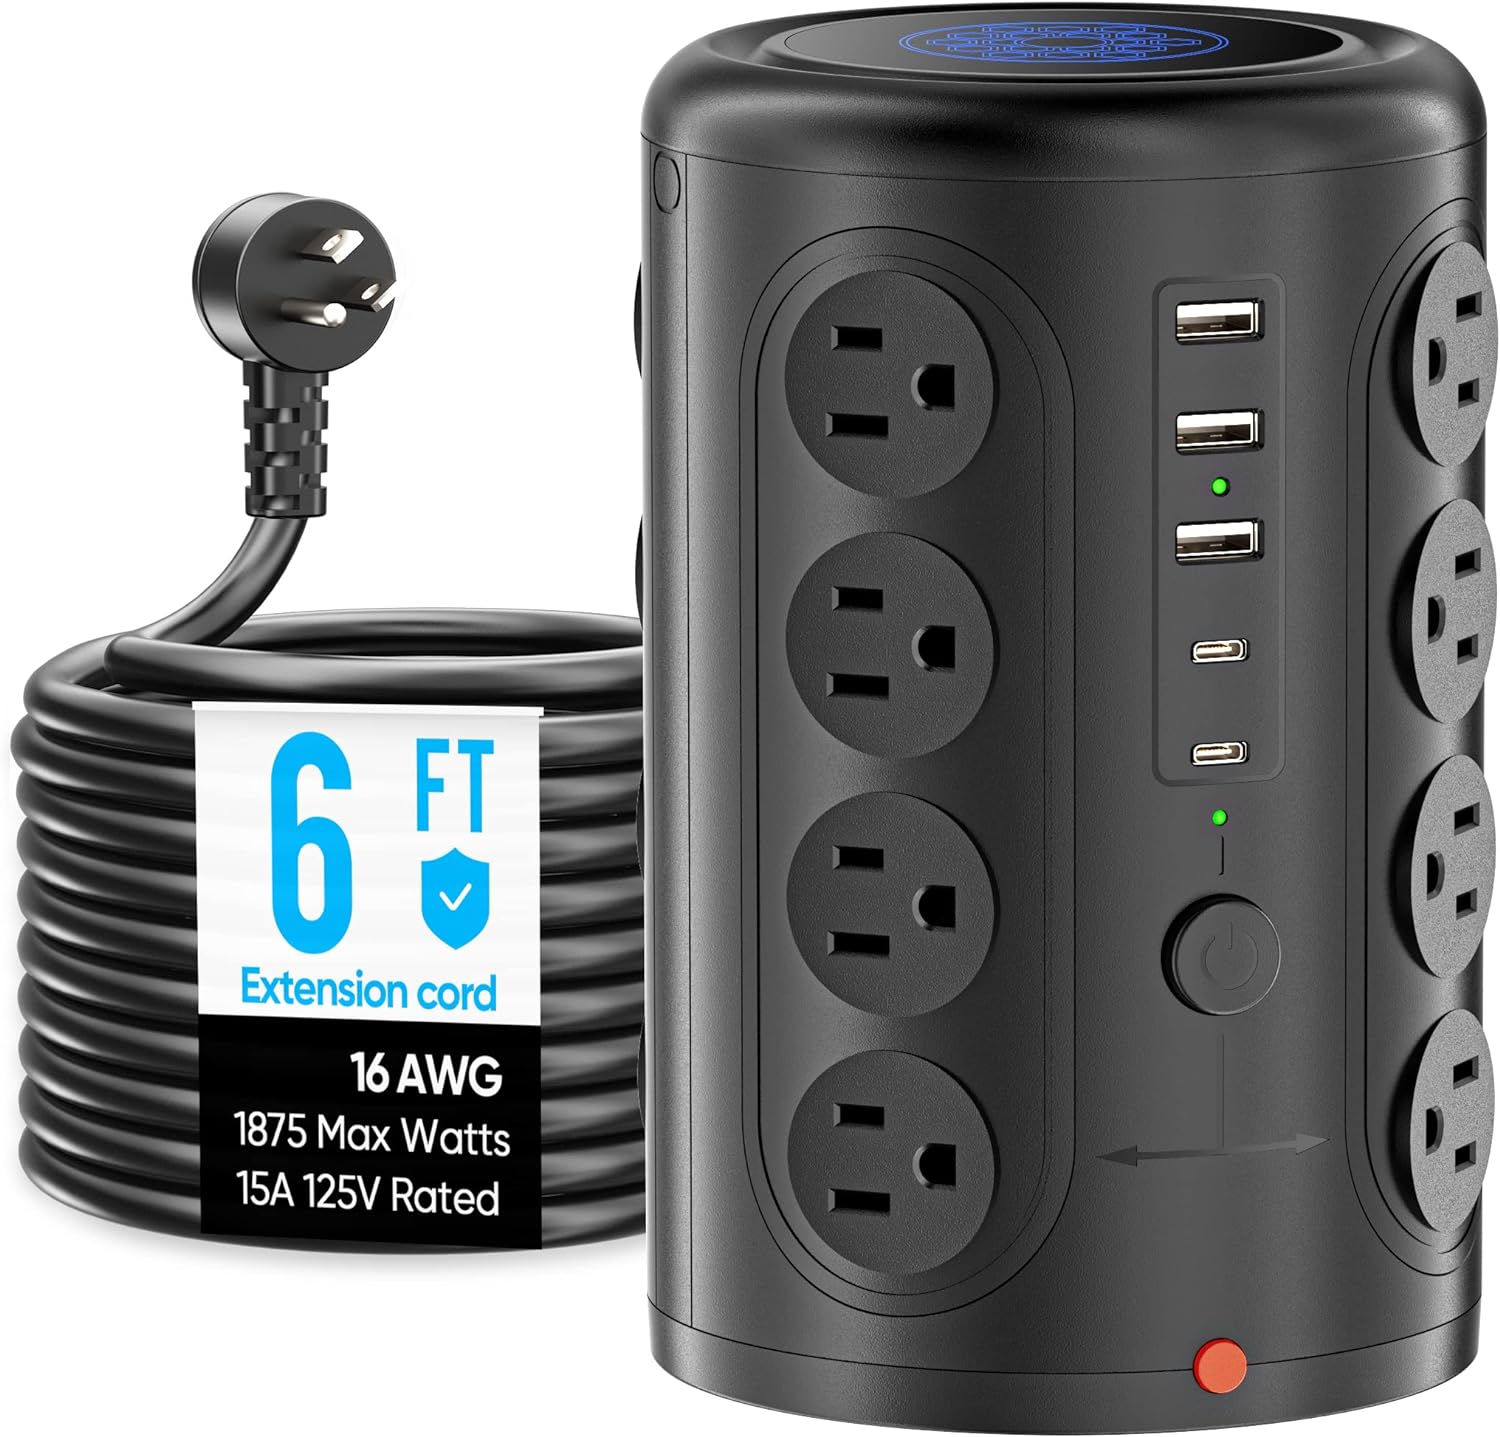 Power Strip Tower with USB Ports, Surge Protector Tower with 16 Outlets 5 USB Ports (2 USB C), 6 FT Extension Cord, 1875W Charging Station for Home Office Desk, Dorm Room Essentials